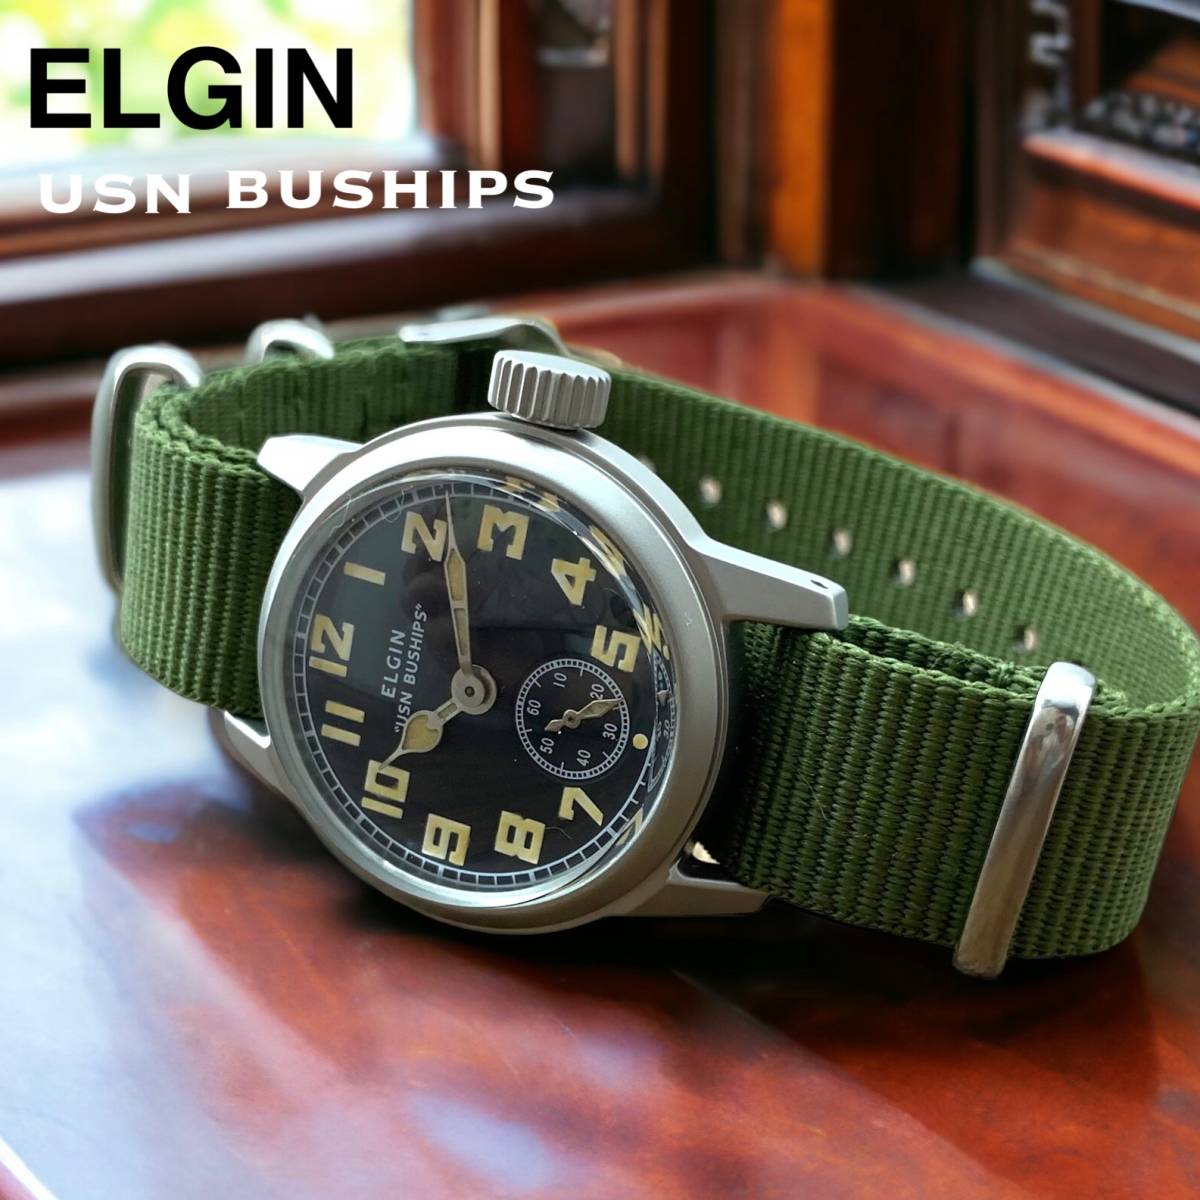 Elgin - (Japanese name) Starts with A - Brand watches